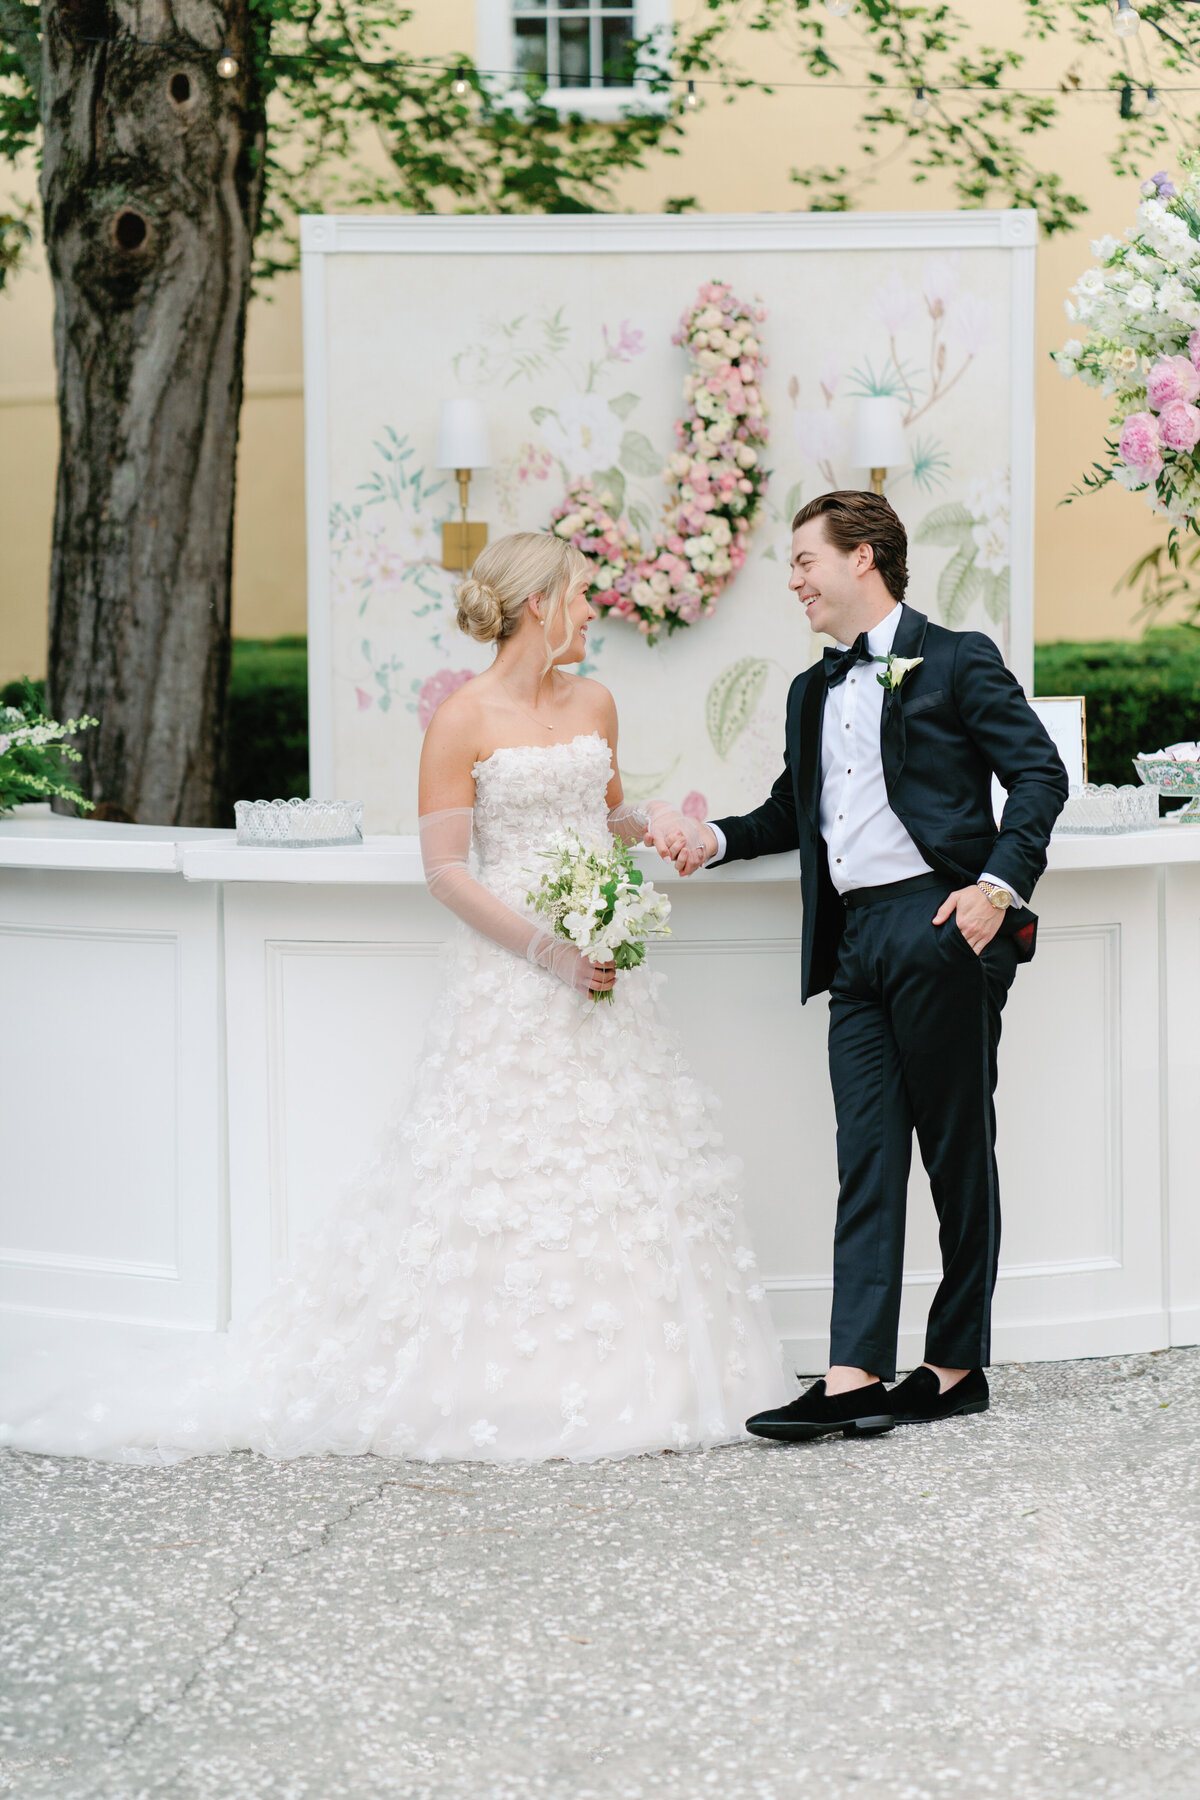 Bride and groom in front of custom bar with floral installation. Historic Charleston wedding venue with yellow walls.